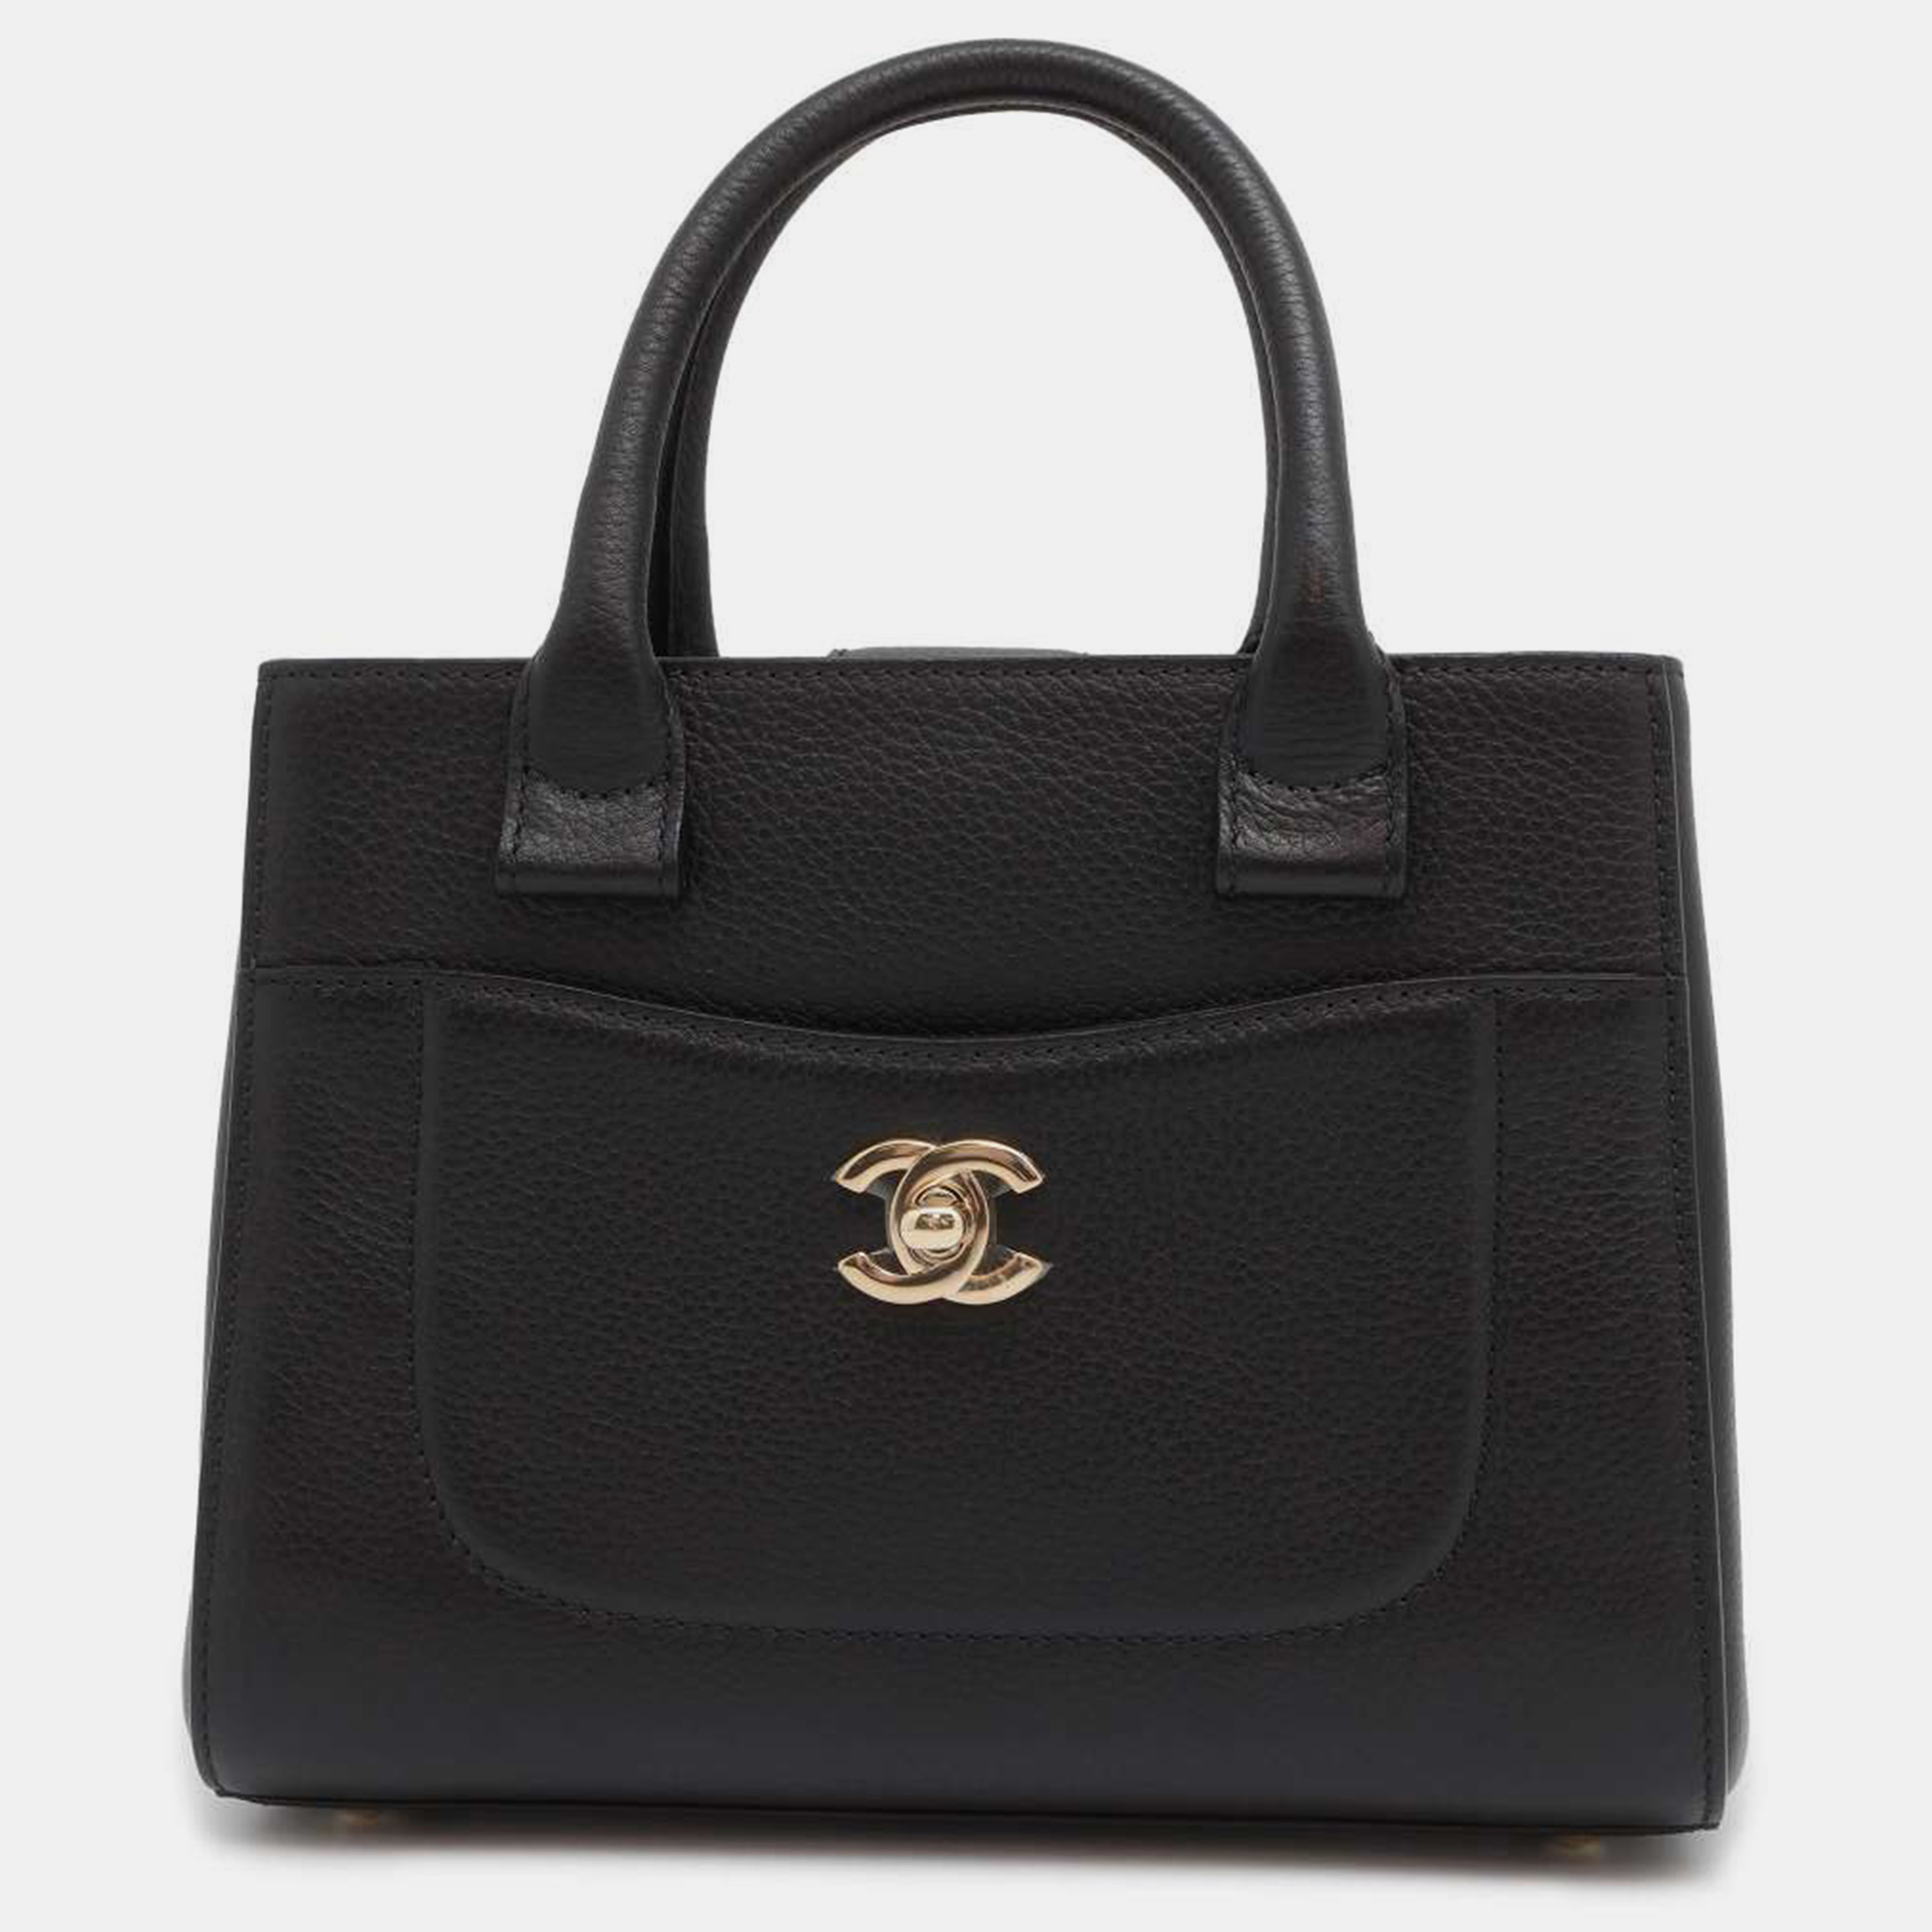 Chanel black leather executive tote bag